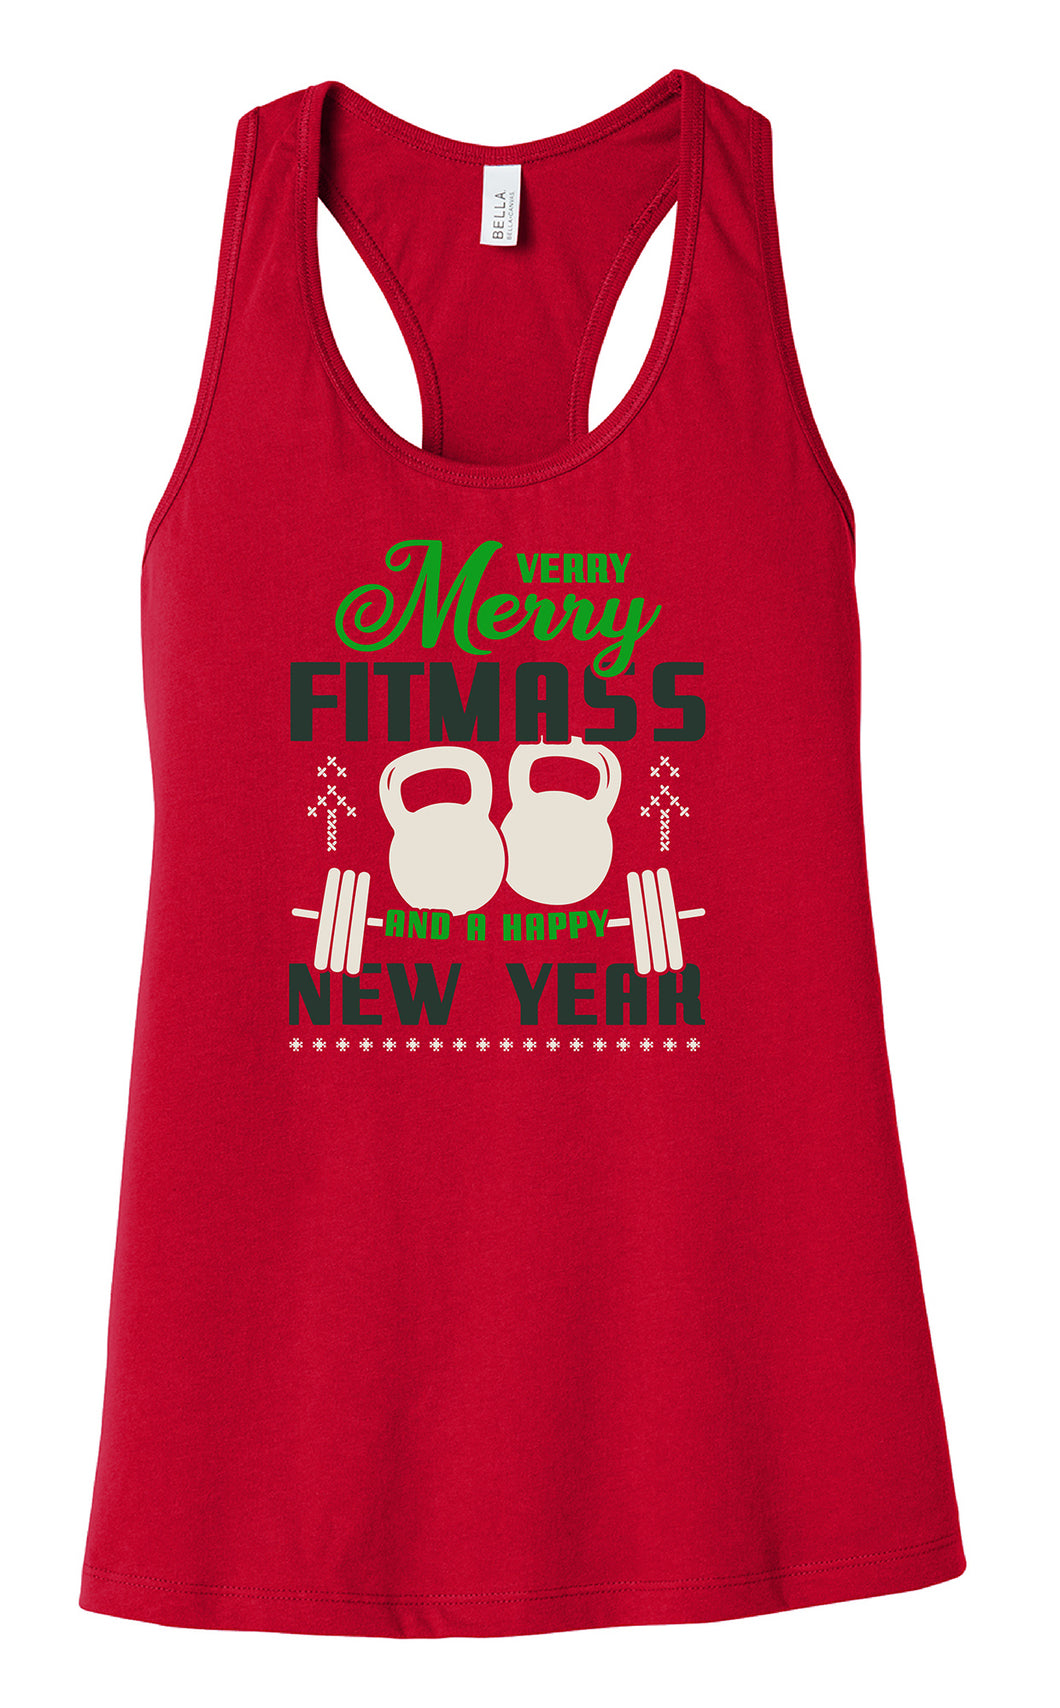 Merry Fitmas and Happy New Year BELLA+CANVAS ® Women’s Jersey Racerback Tank